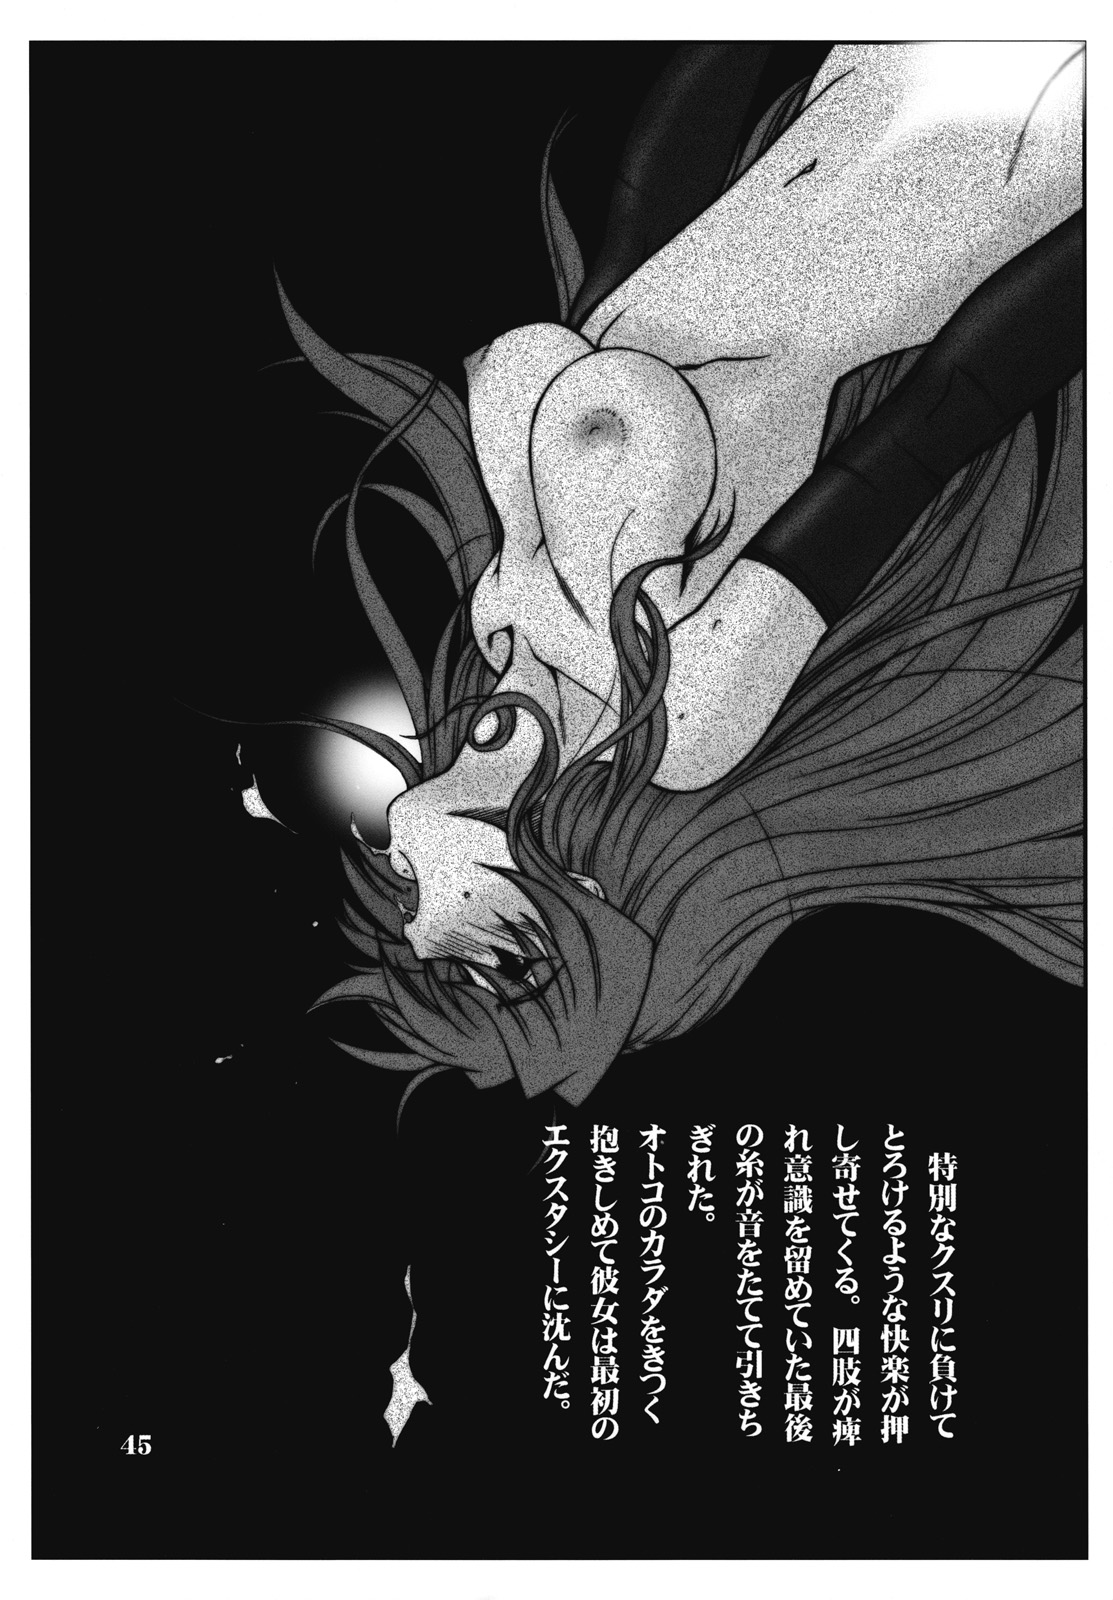 (SC32) [AXZ (Various)] UNDER RED E2 (Kiddy Grade) page 46 full